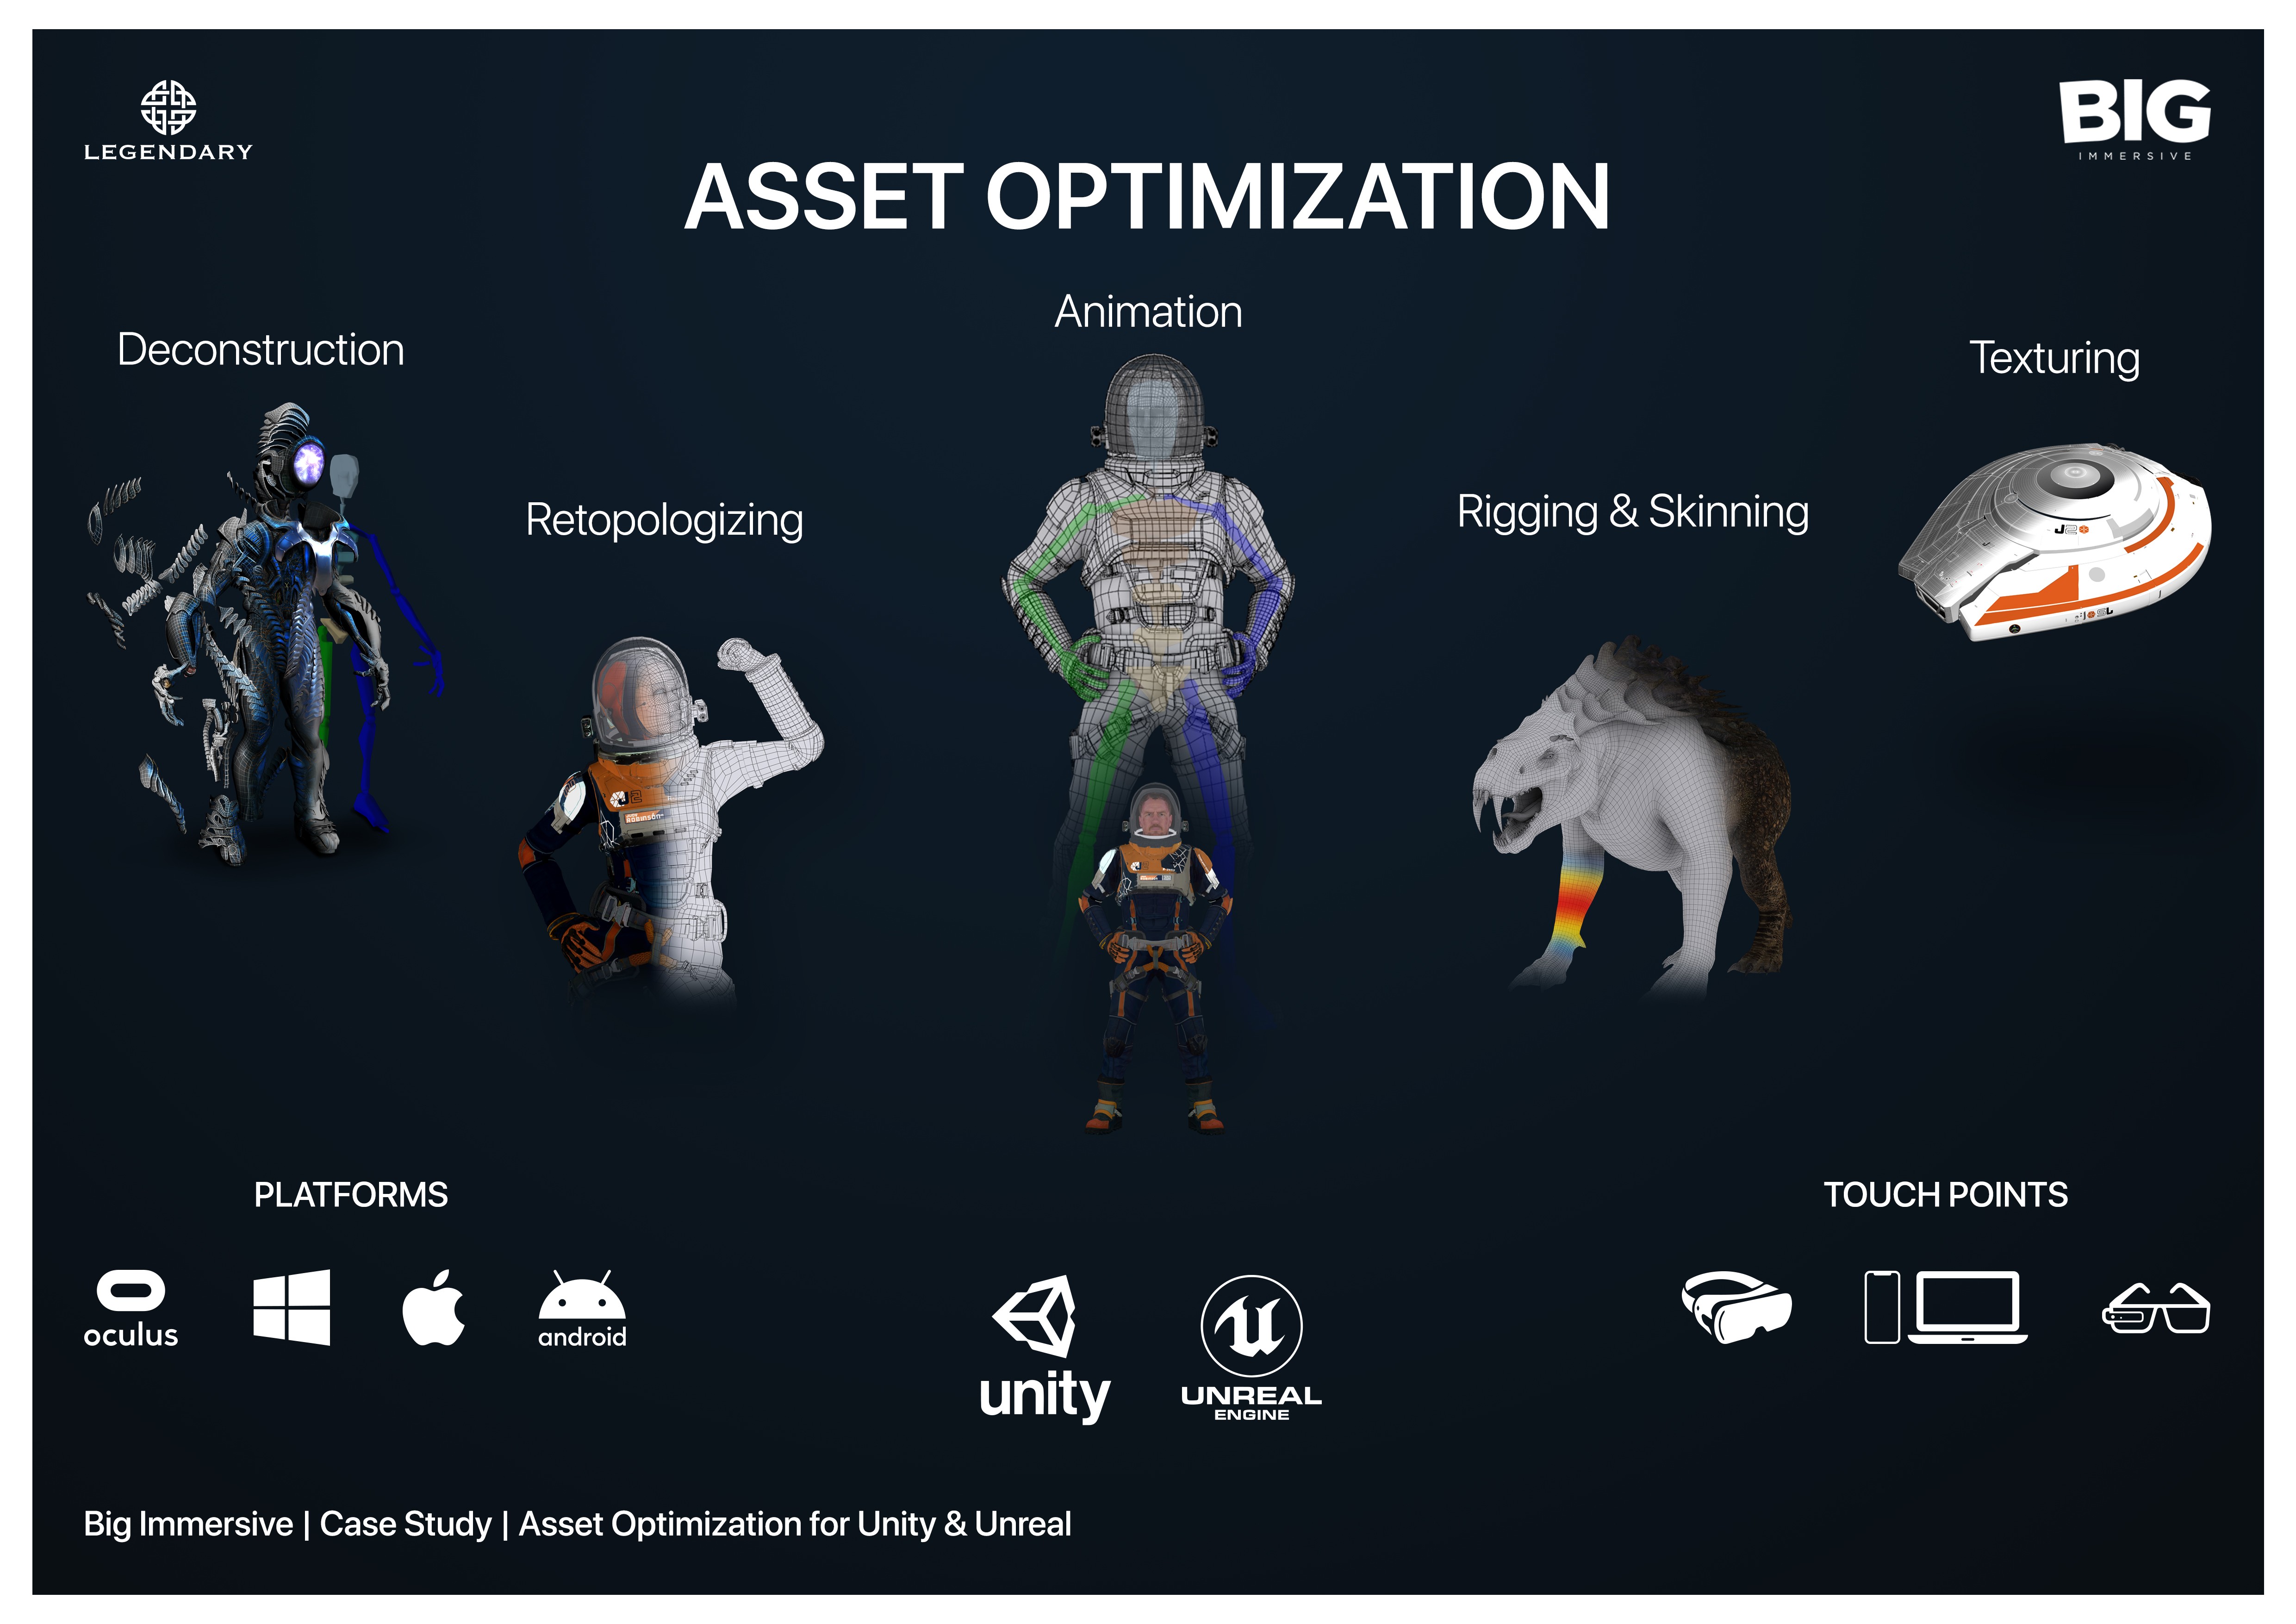 Lost in Space - Asset Optimization Case Study - Big Immersive - Optimized